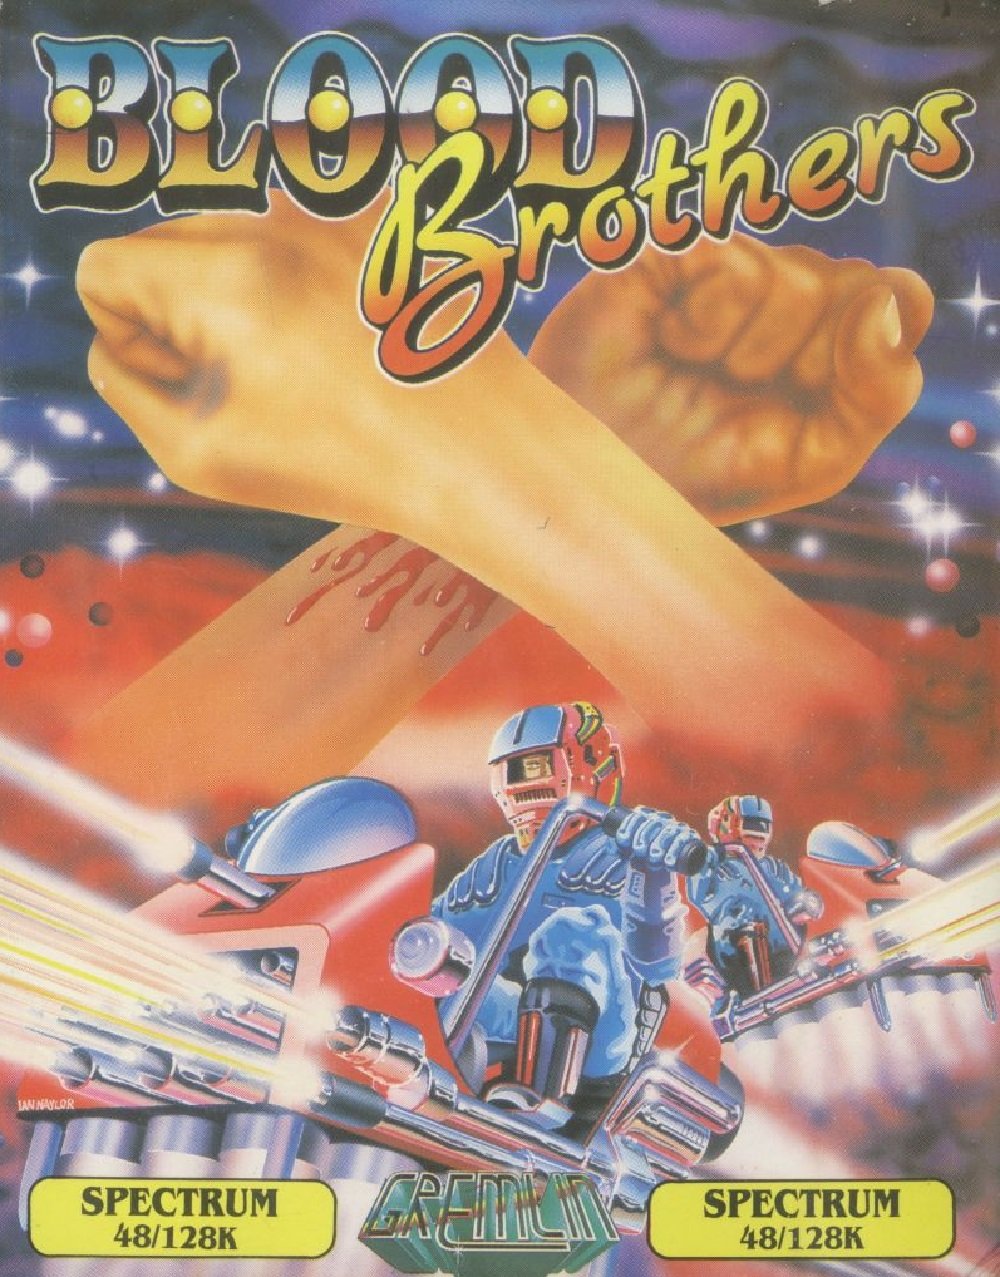 Image of Blood Brothers